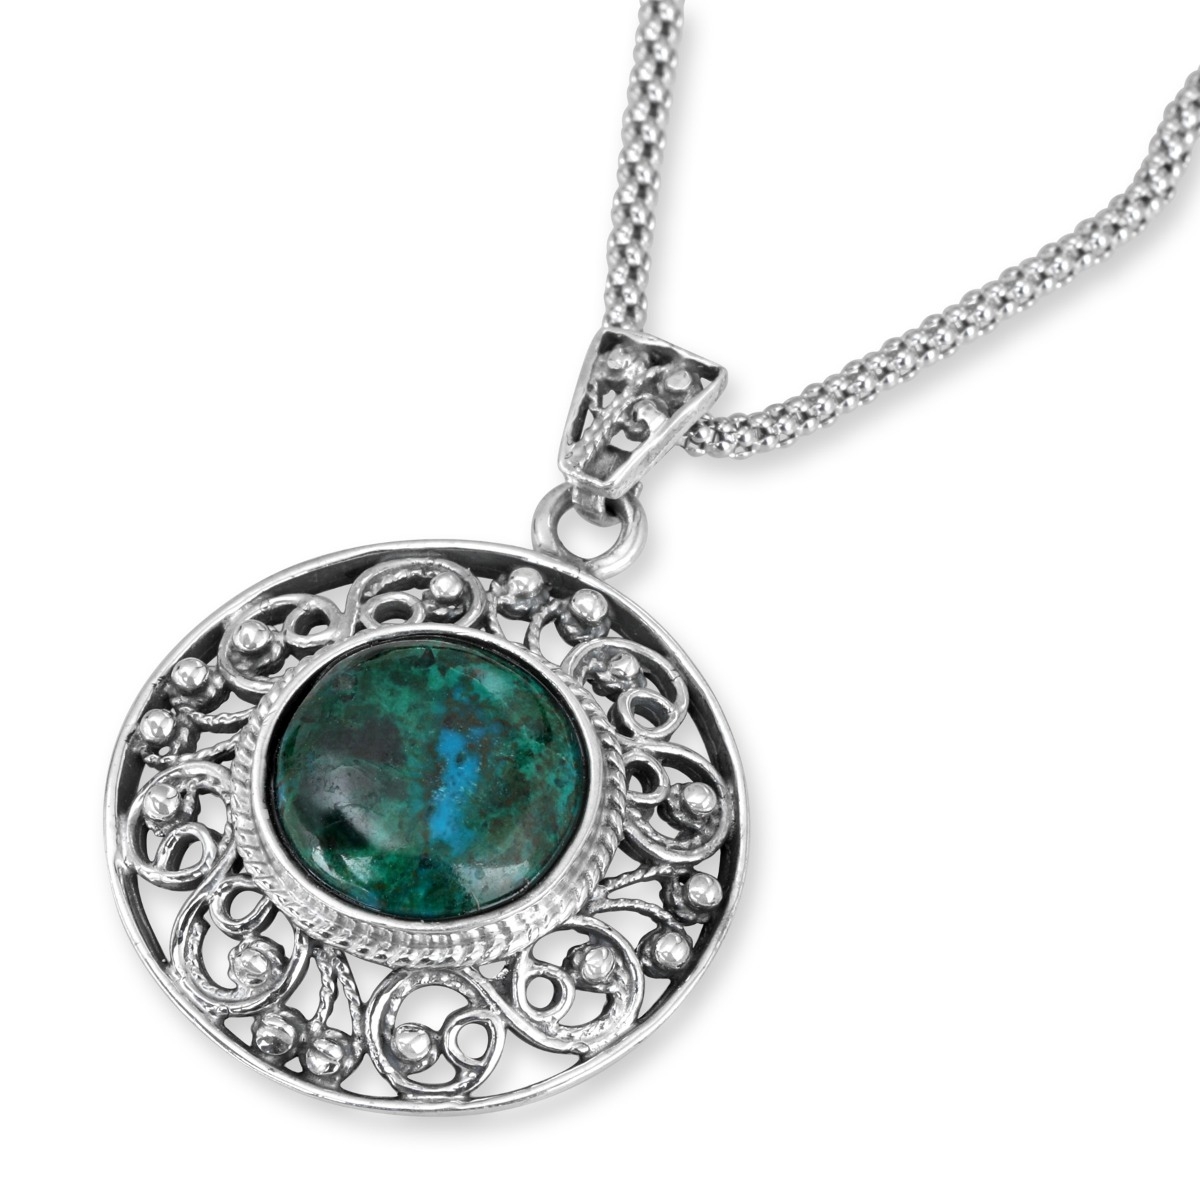 Rafael Jewelry Convex Eilat Stone and Silver Necklace - 1